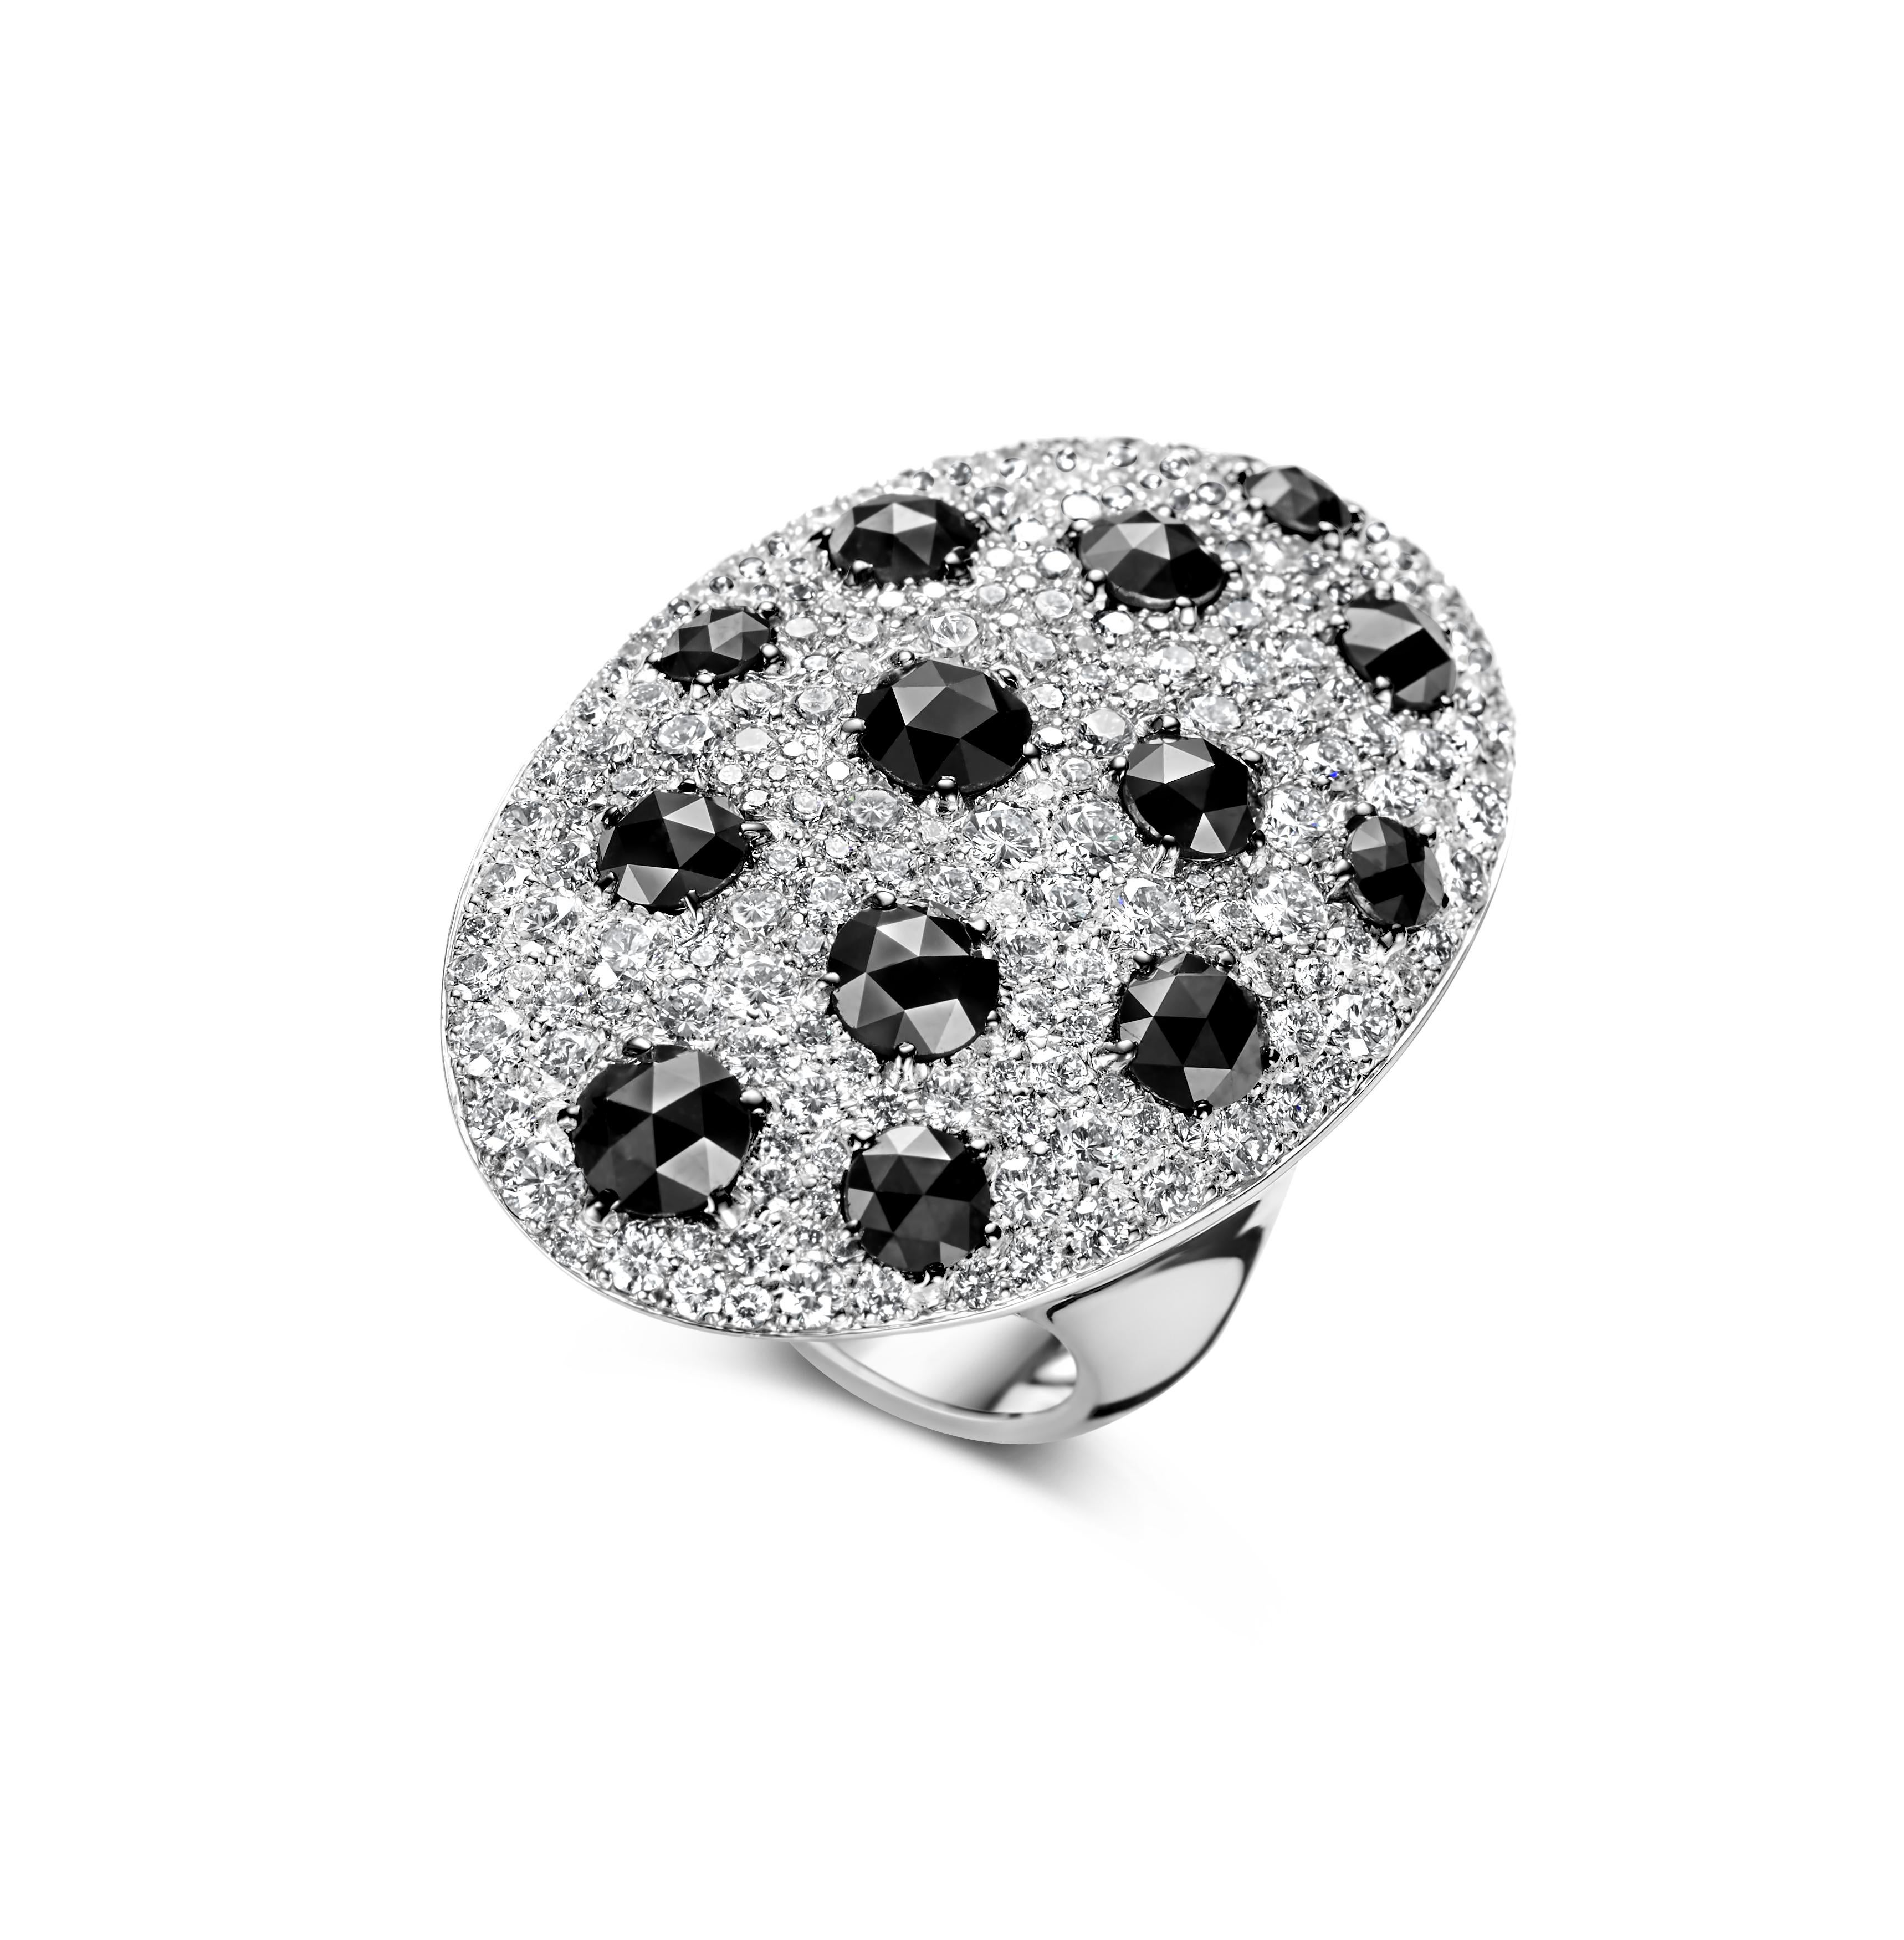 Gorgeous 18kt White Gold Ring With 3.88 ct Black and 3.87ct White Diamonds

Diamonds: Brilliant cut diamonds (together ca. 3.87 ct G SI ), rose cut black diamonds (together ca. 3.88 ct)

Material: 18kt white gold

Measurements: Diameter head of ring